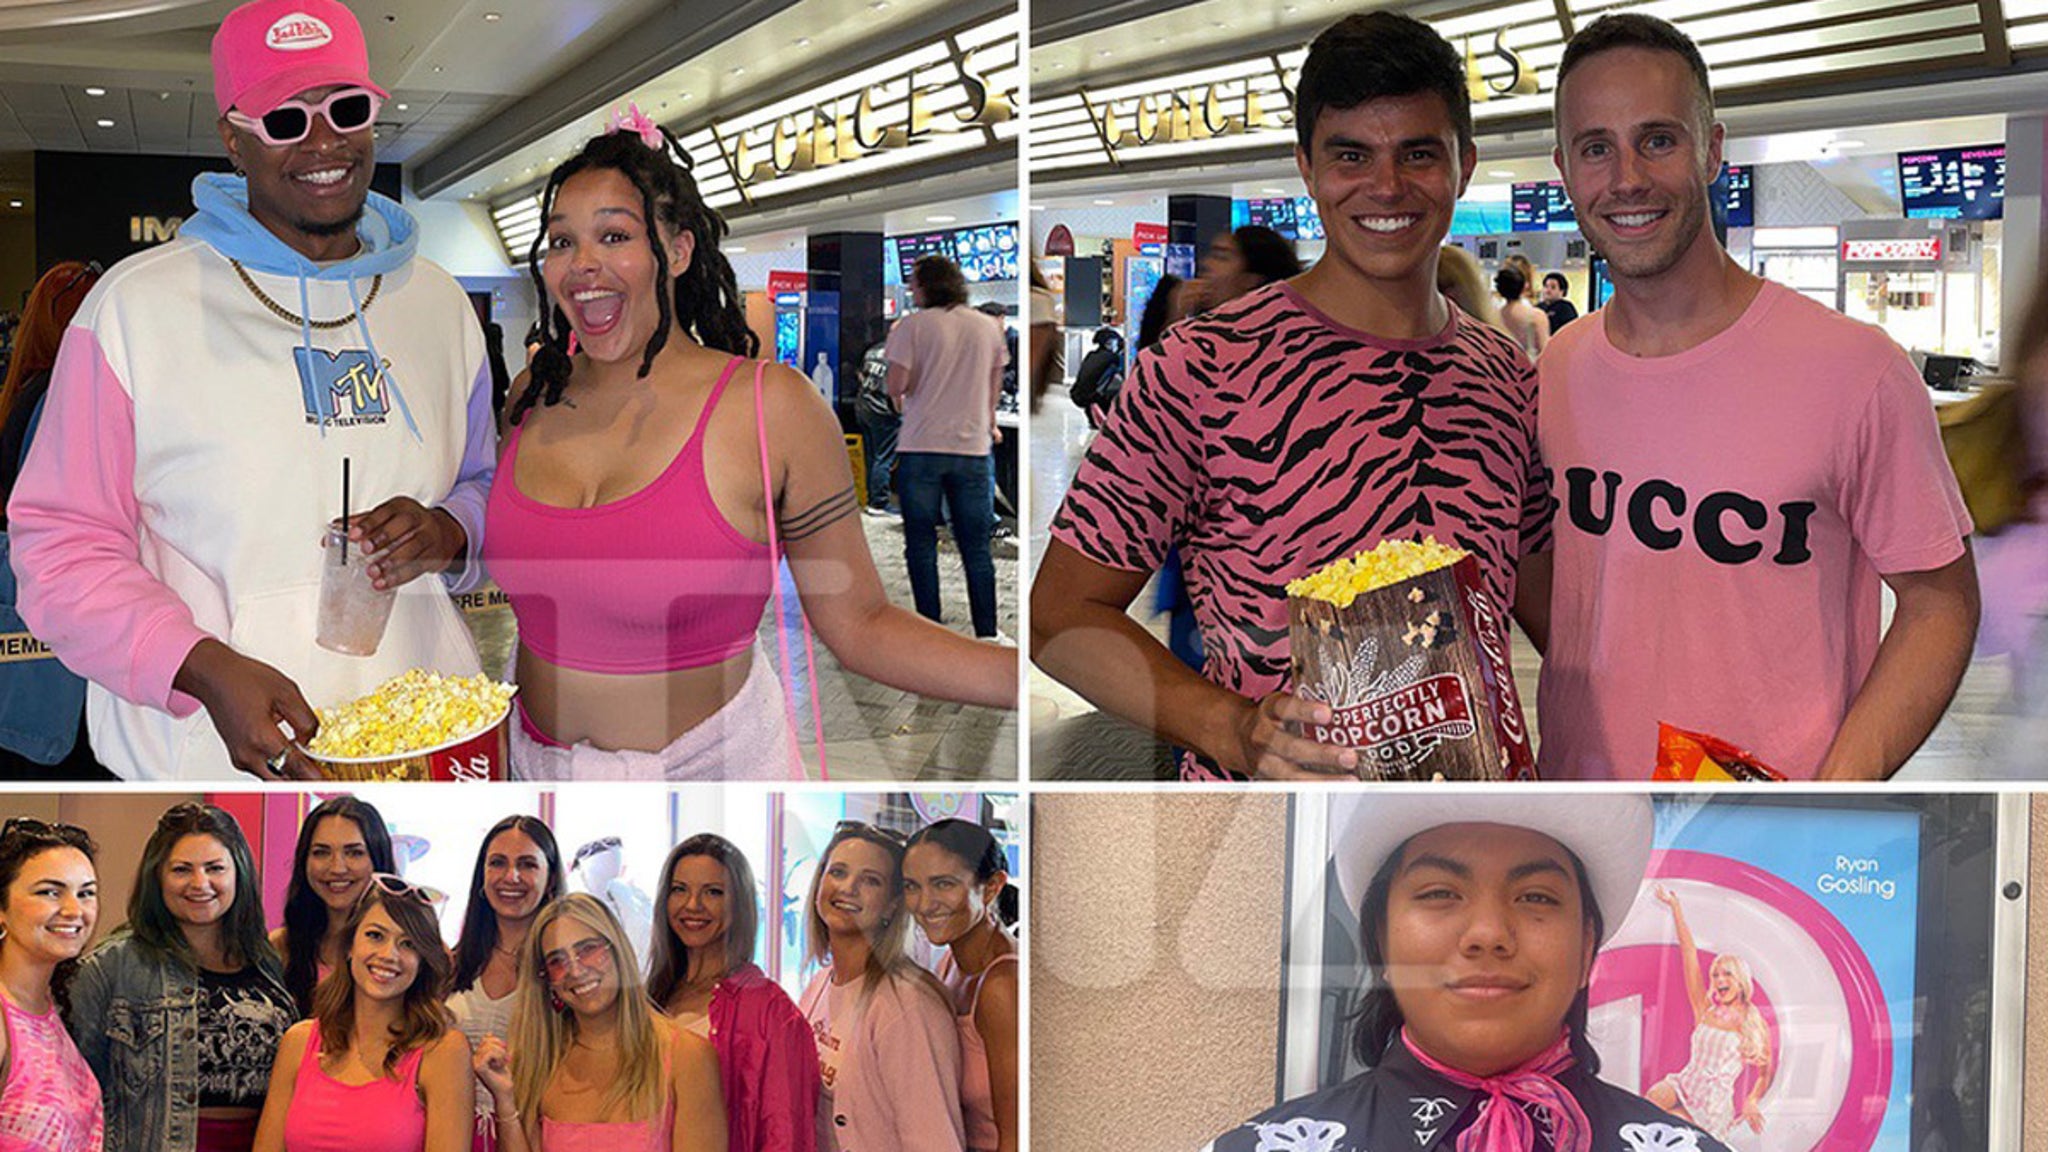 'Barbie' fans dress up for a movie at The Grove in Los Angeles